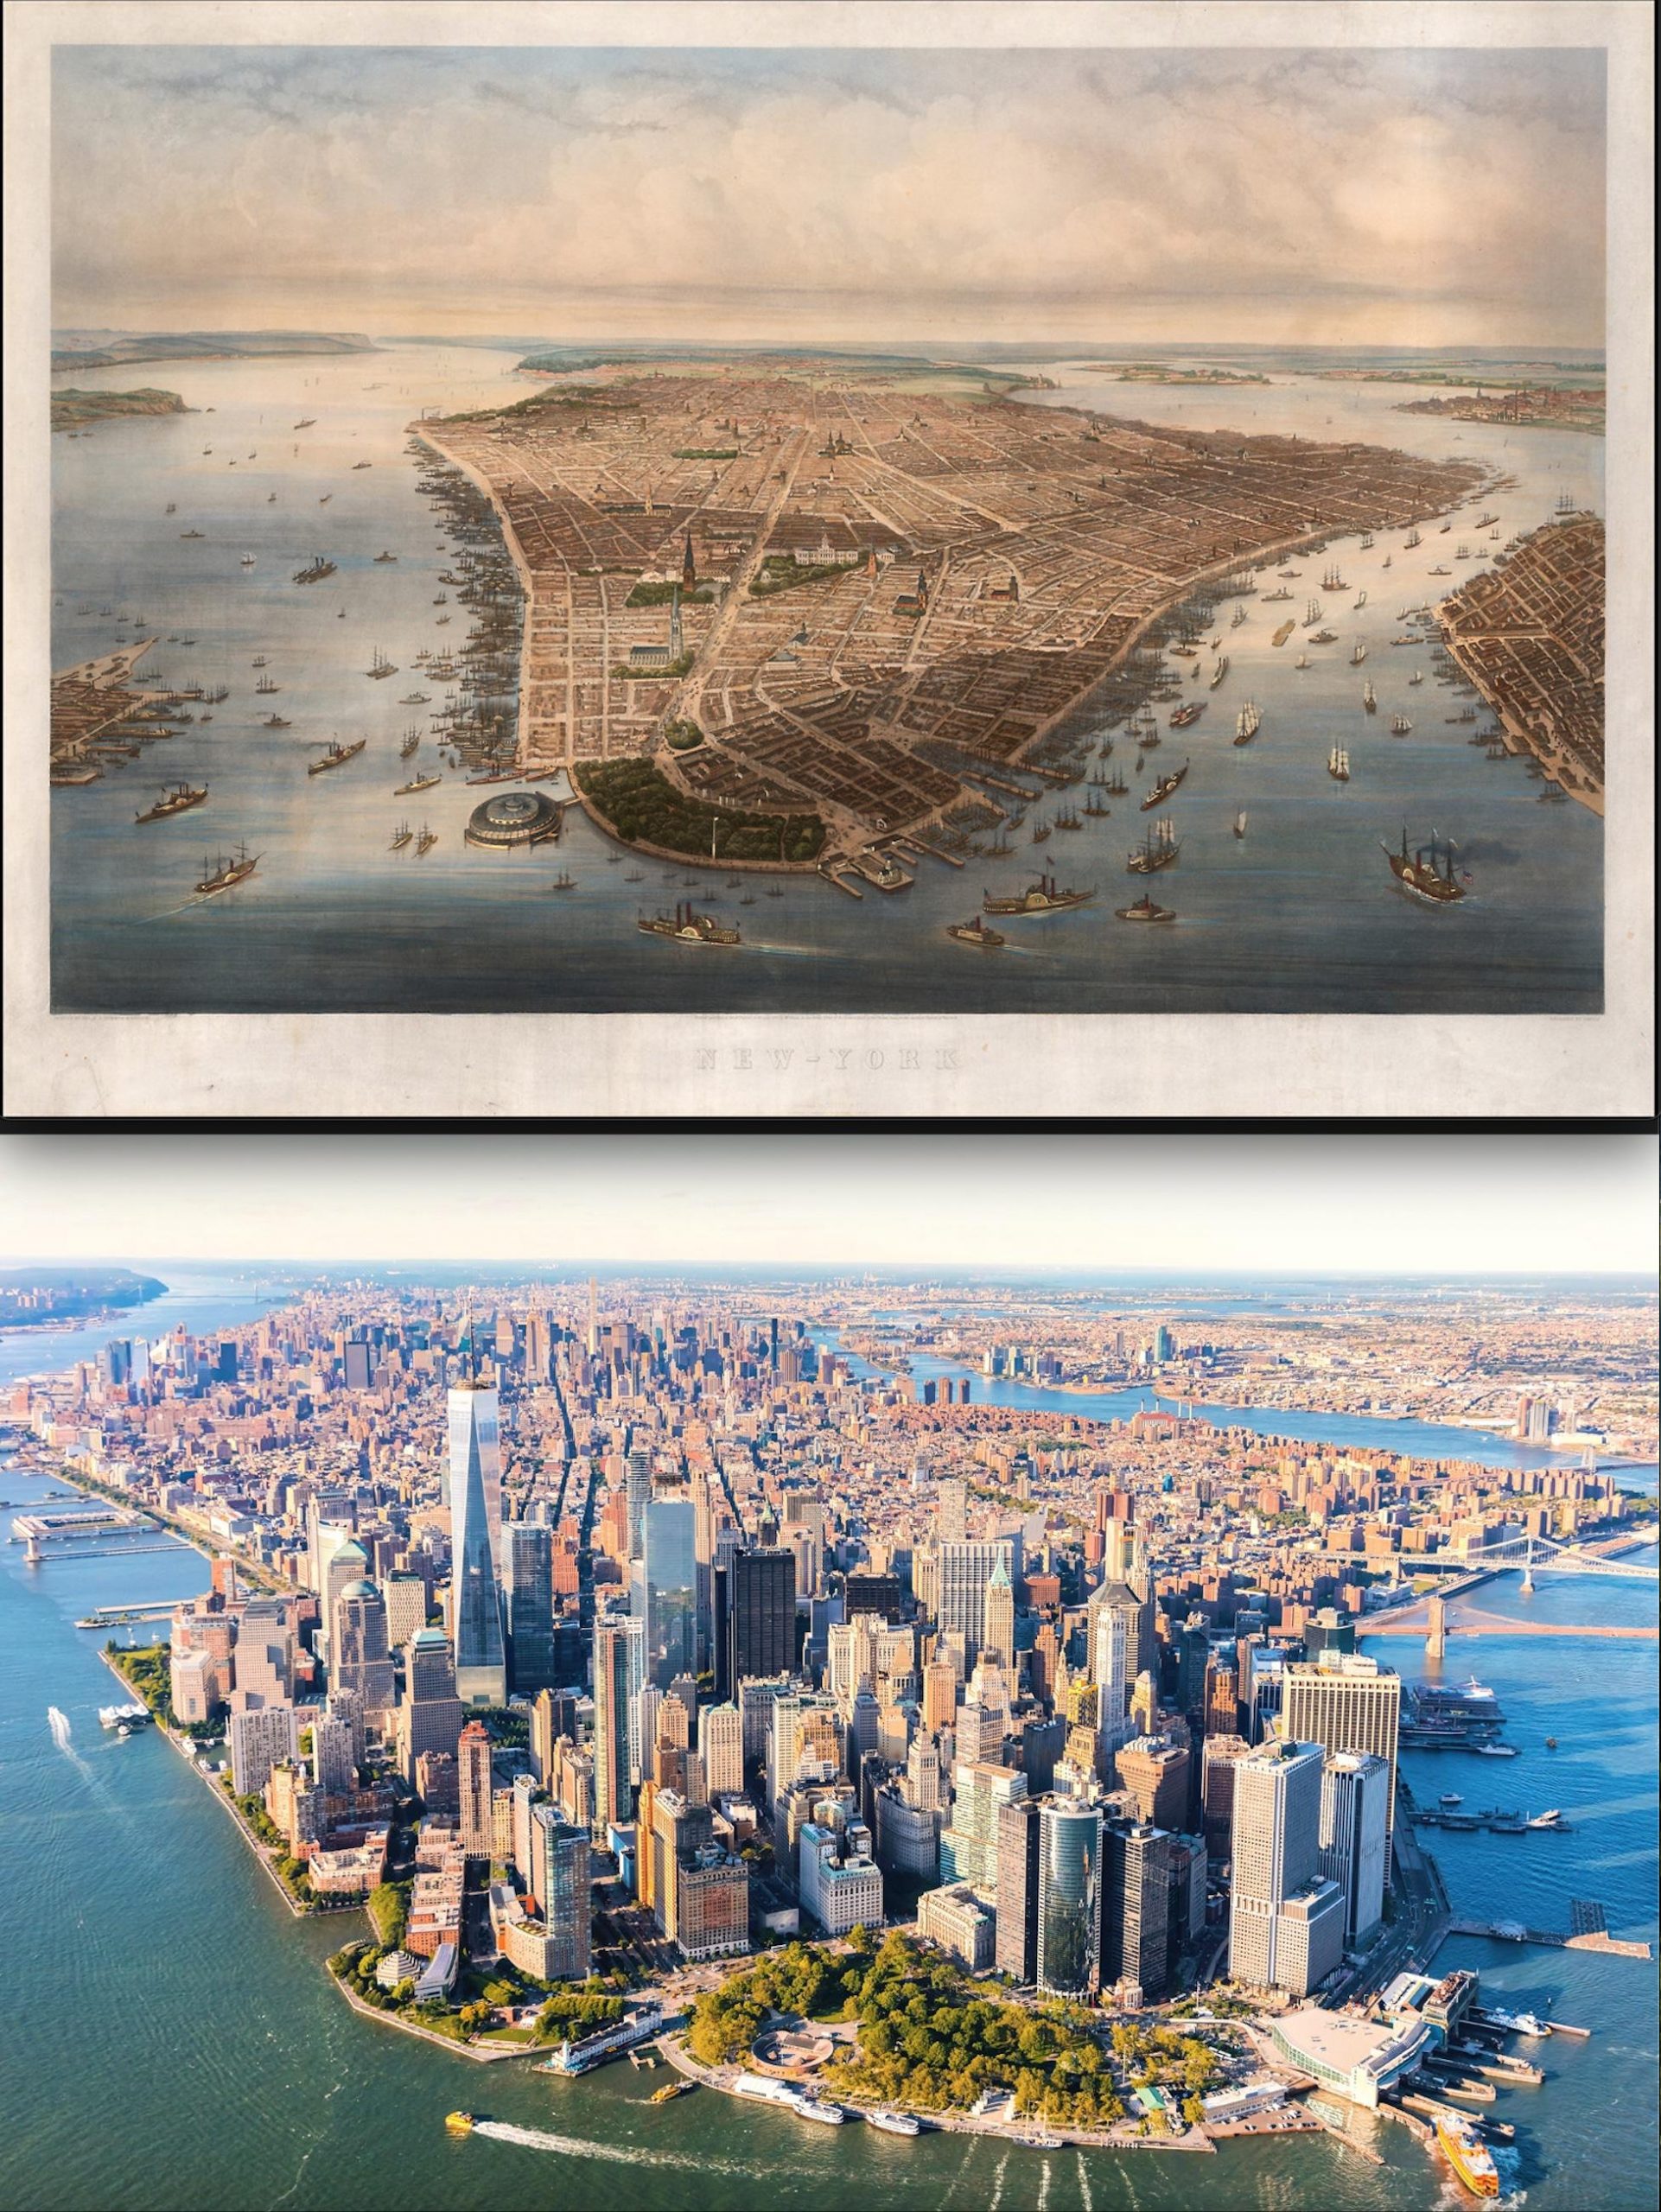 Manhattan in 1851 and today